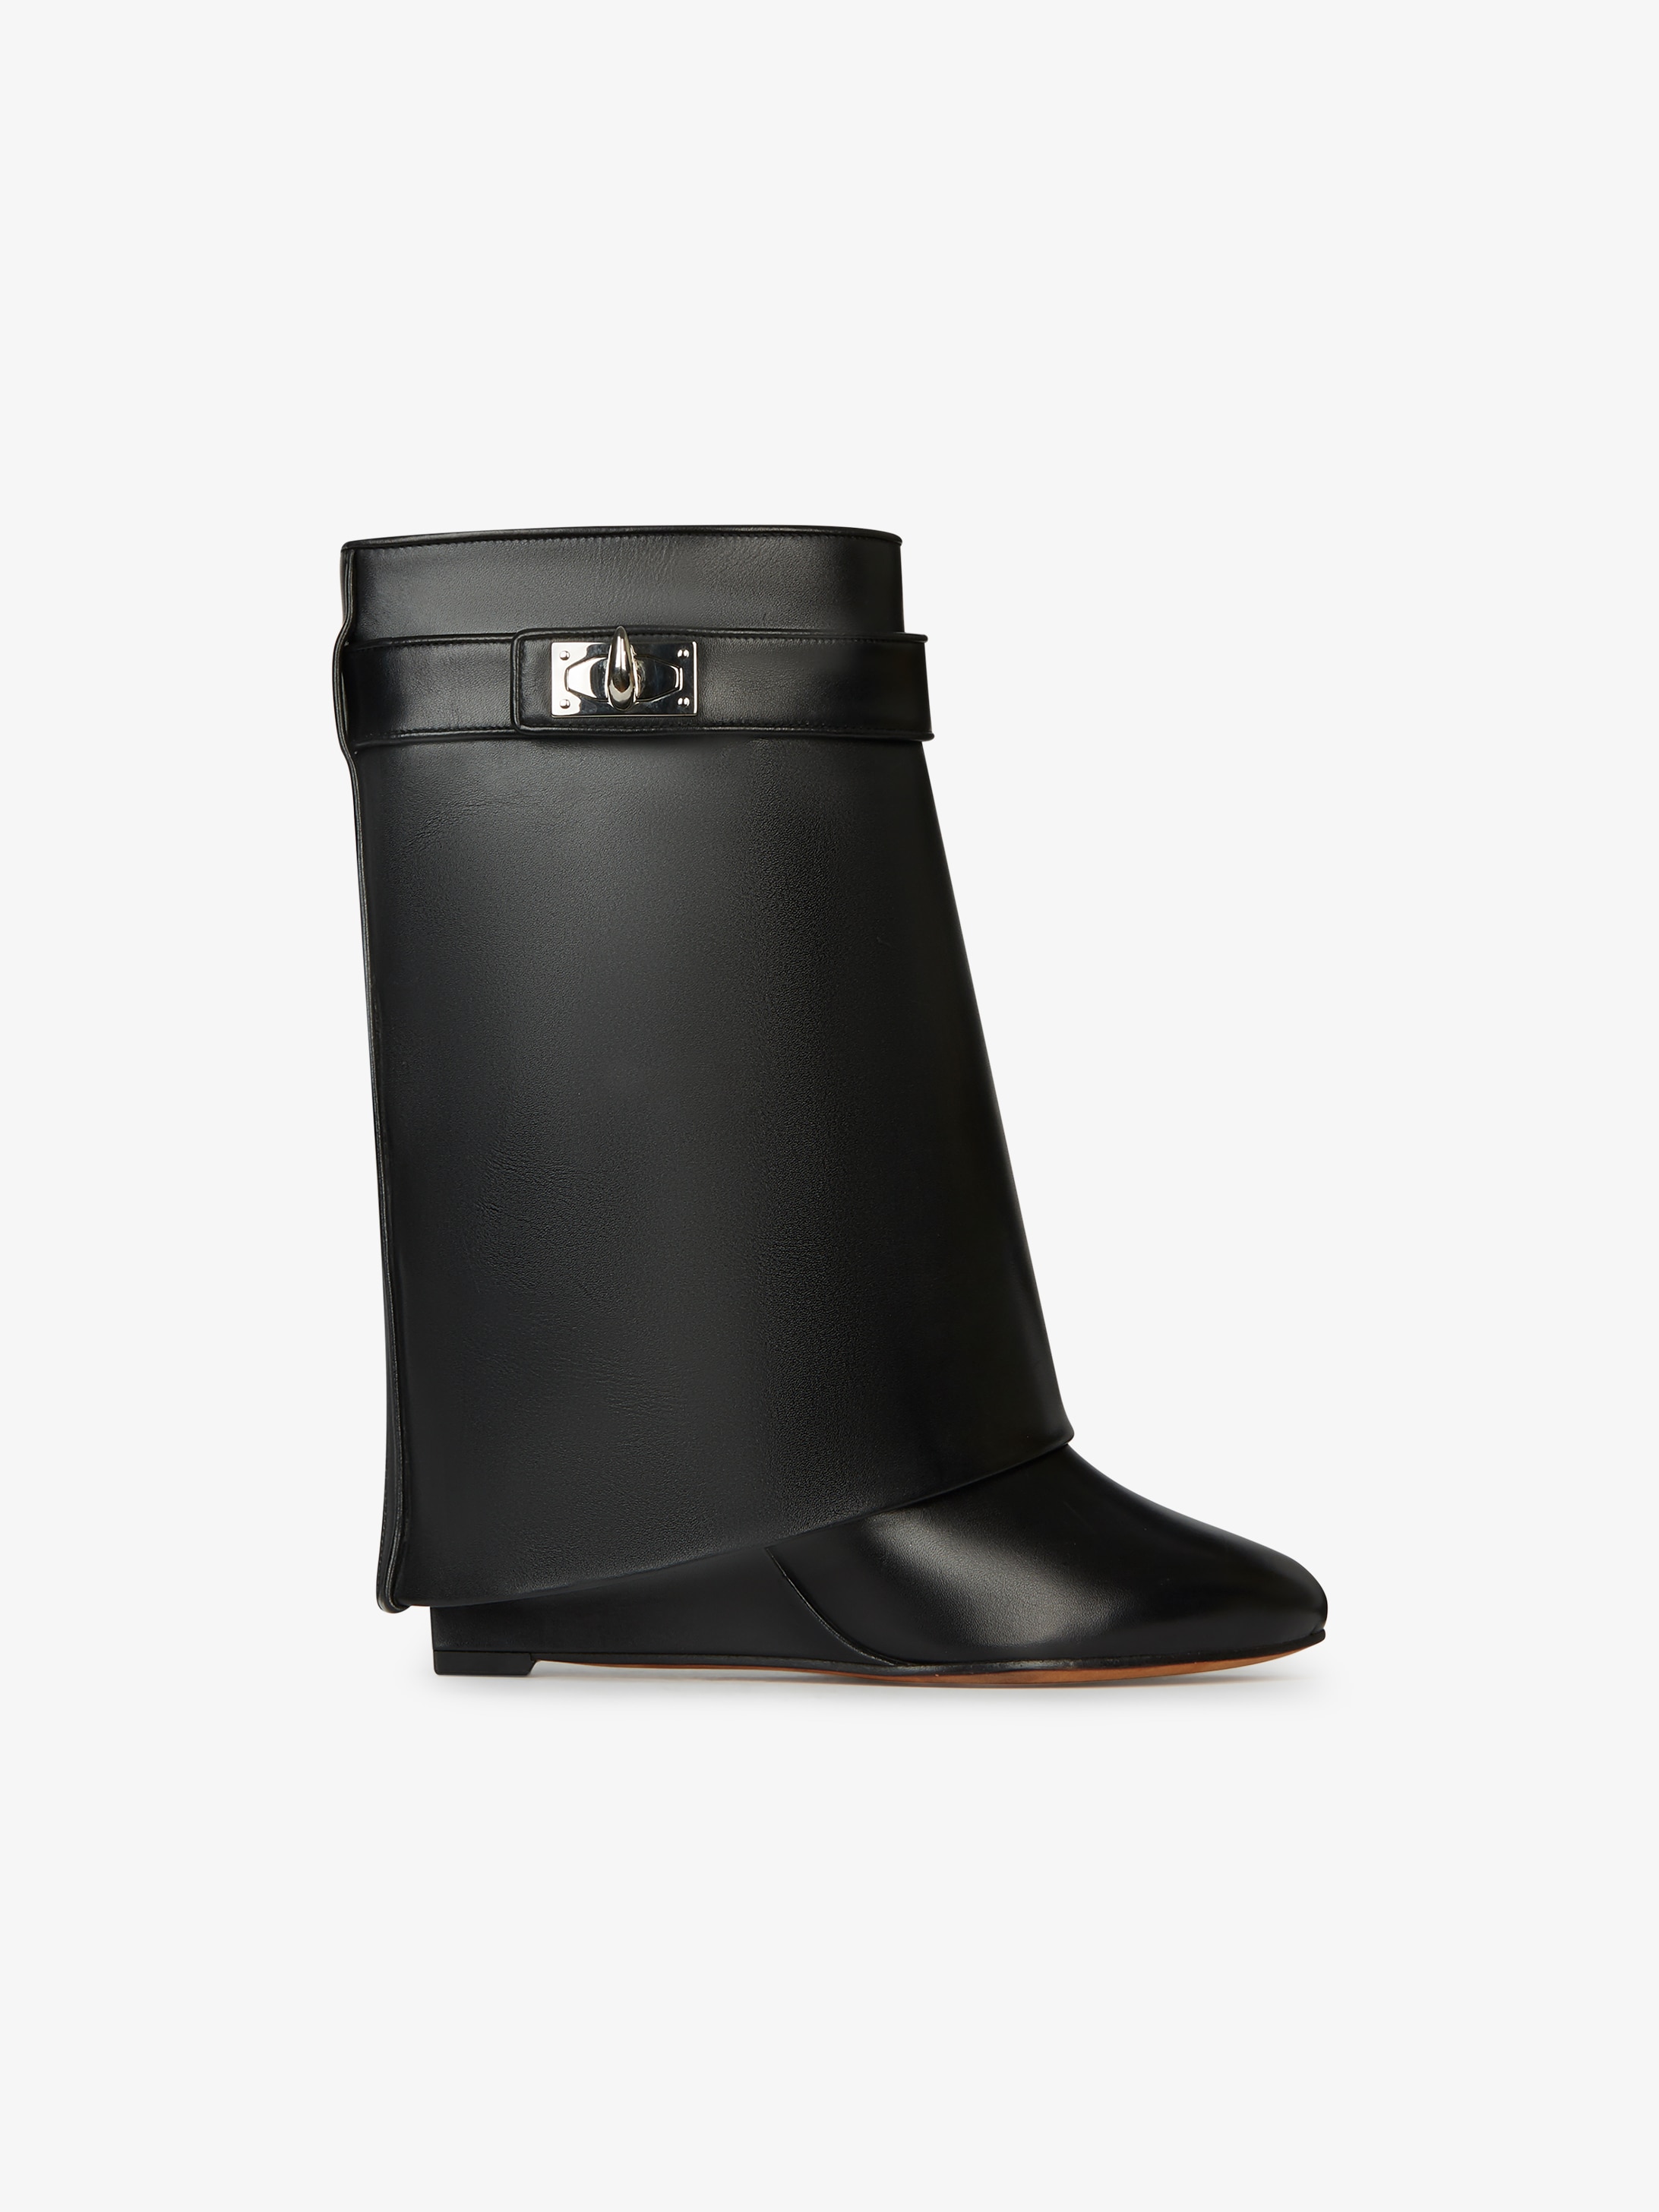 givenchy boots 2019